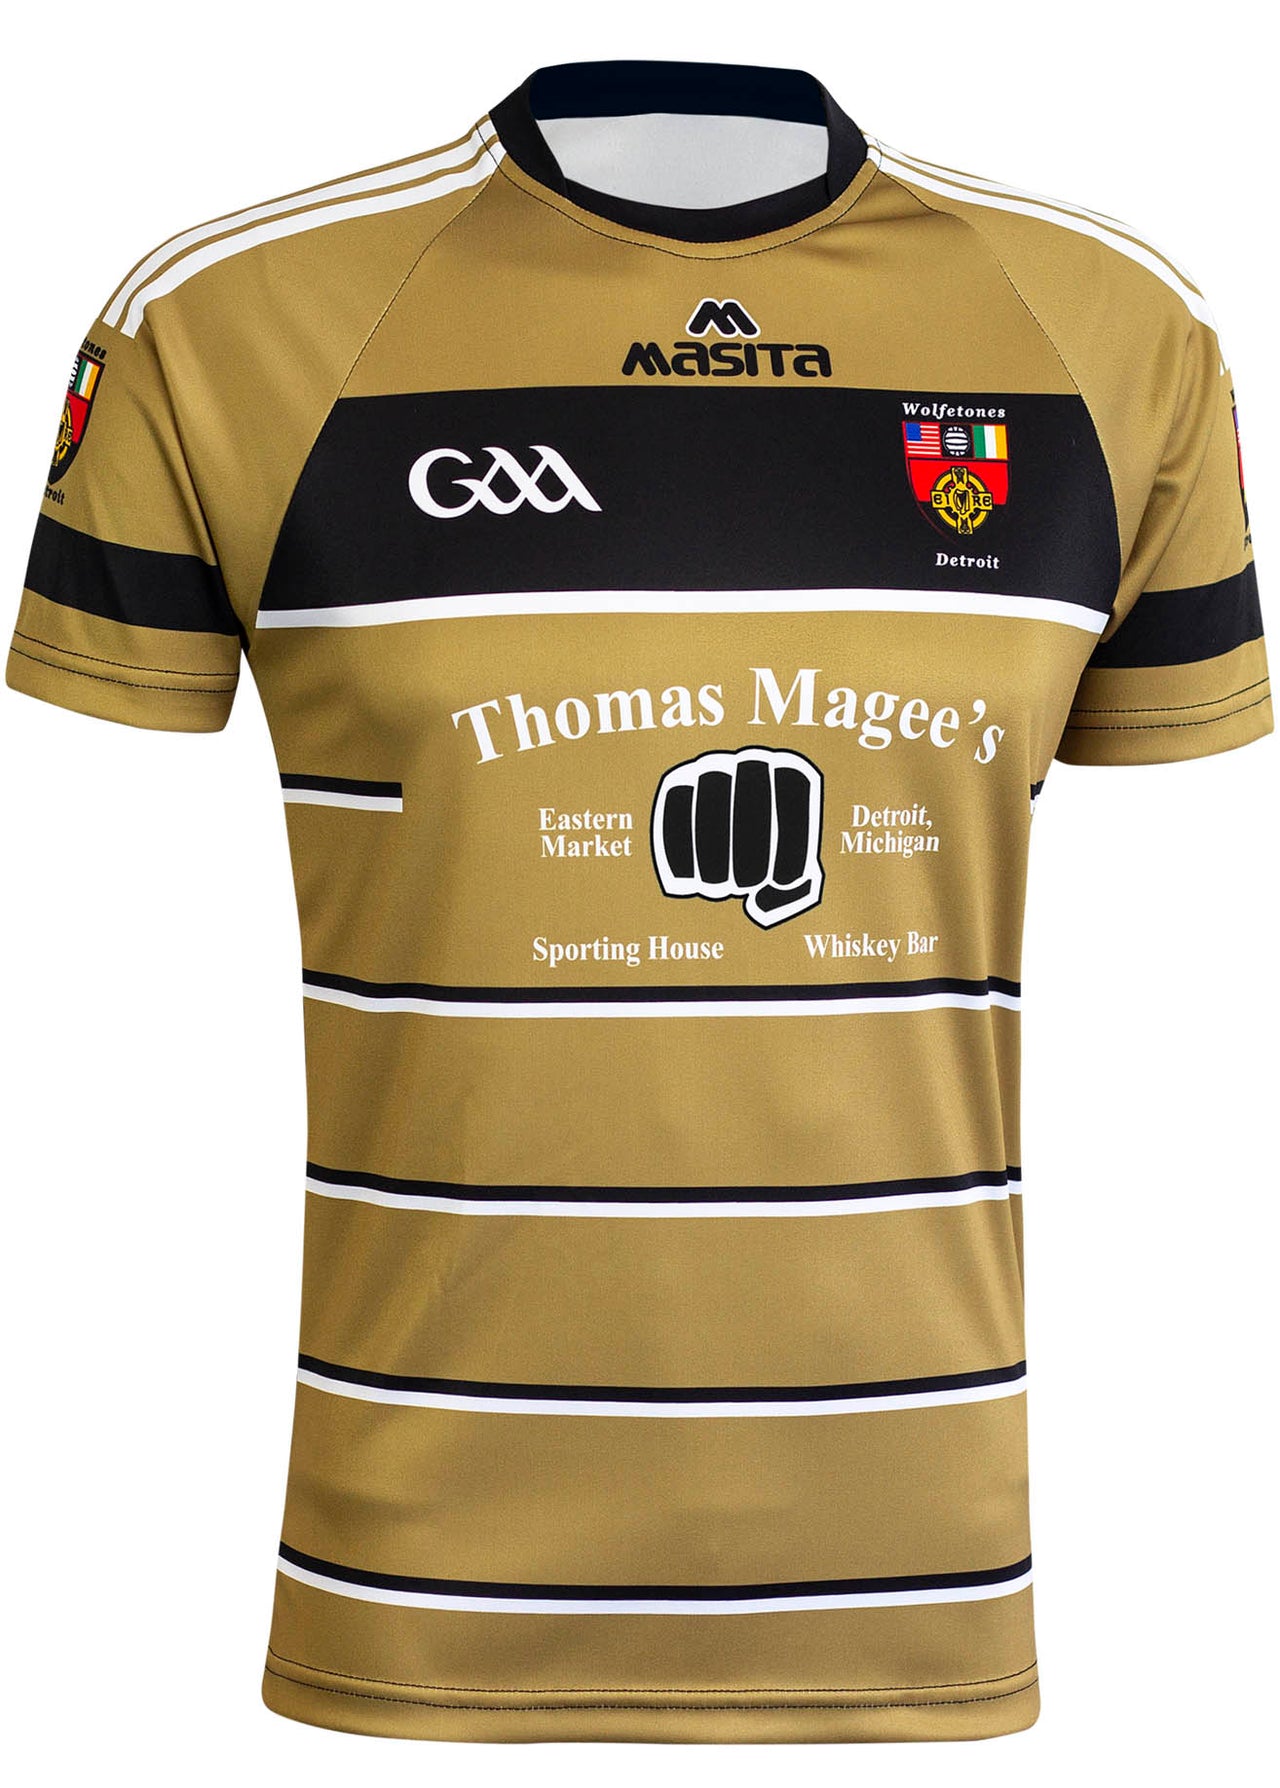 Detroit Wolfe Tones Away Jersey Player Fit Adult